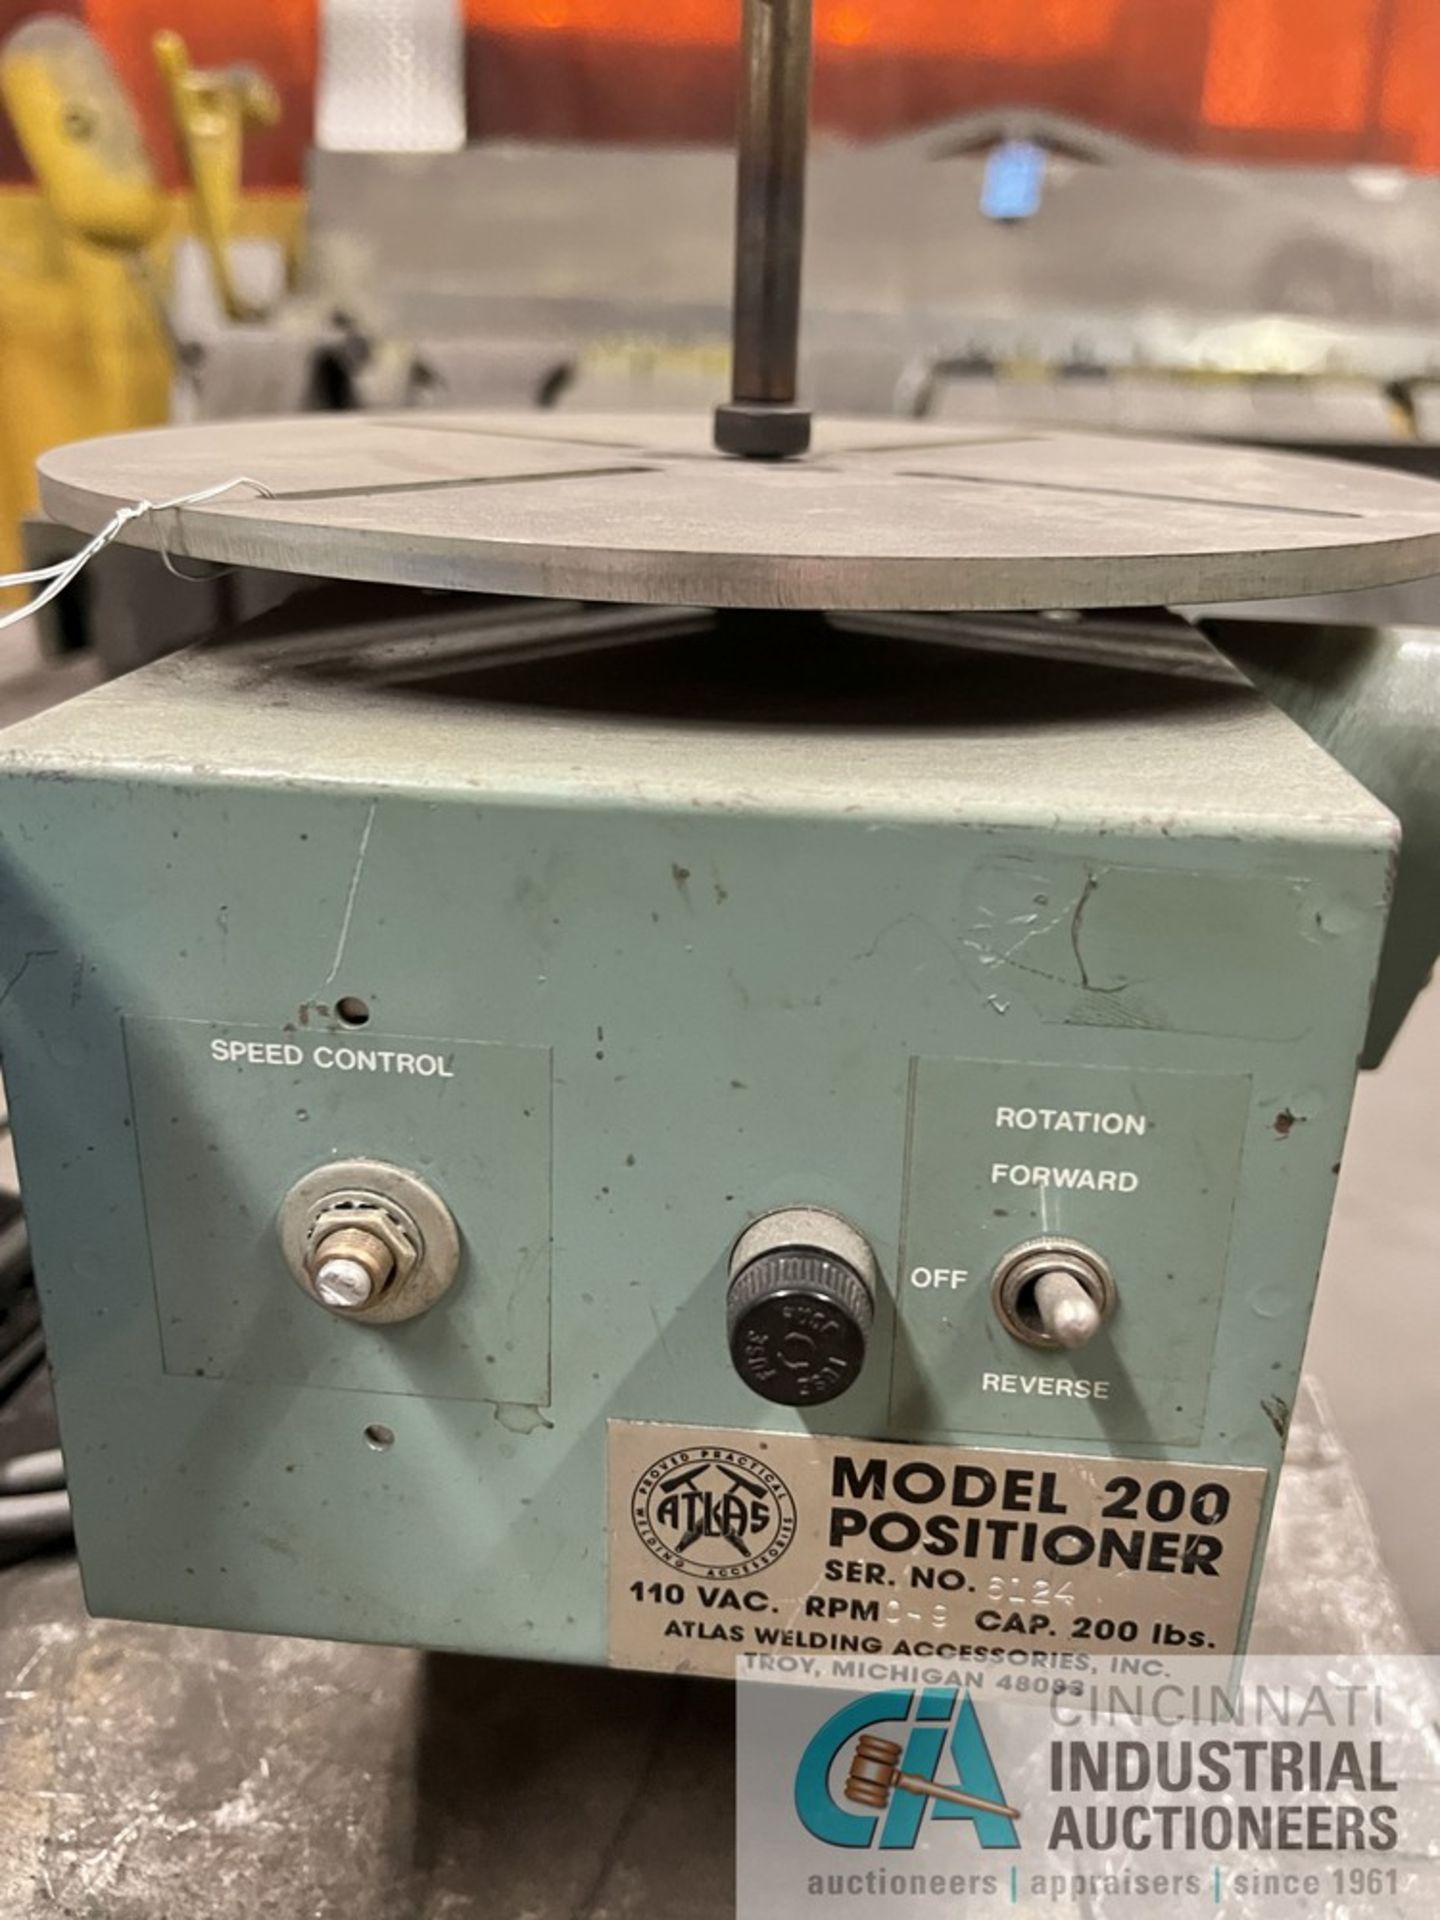 ATLAS MODEL 200 POSITIONER; S/N 6124, 10" ROUND TABLE AREA, FOOT PEDAL CONTROL - Image 2 of 4